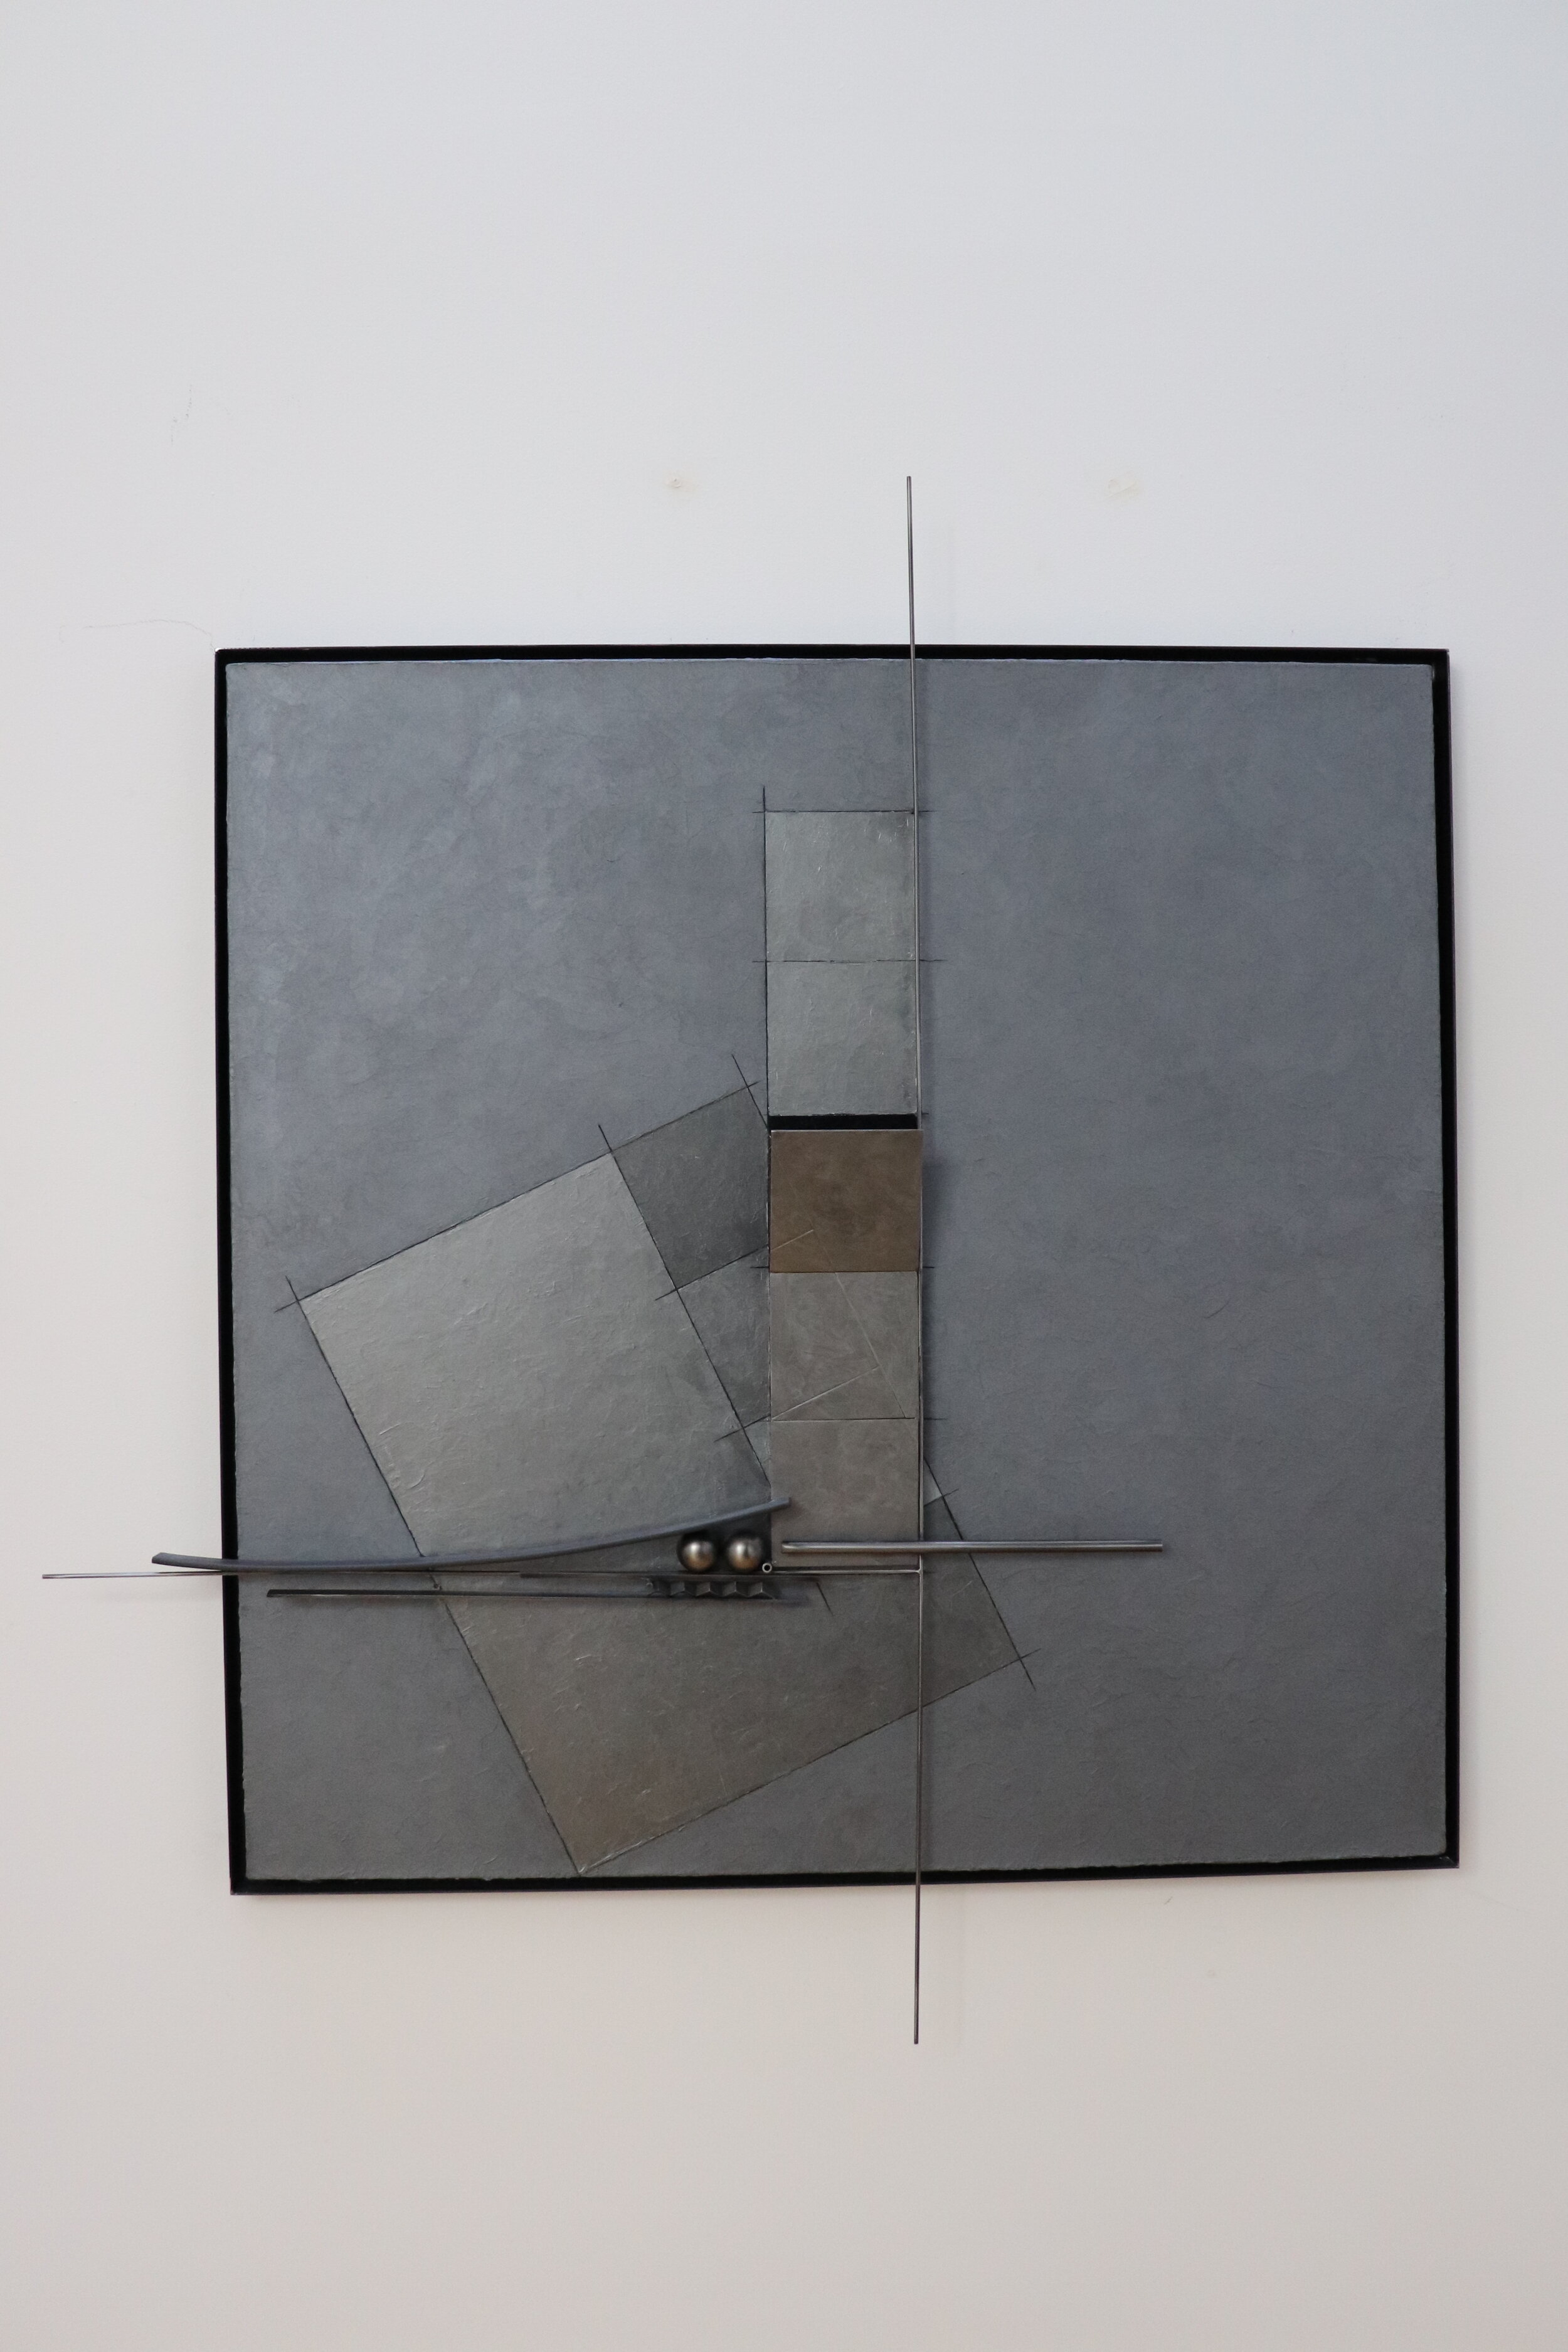 Steel Painting No. 42, 2008